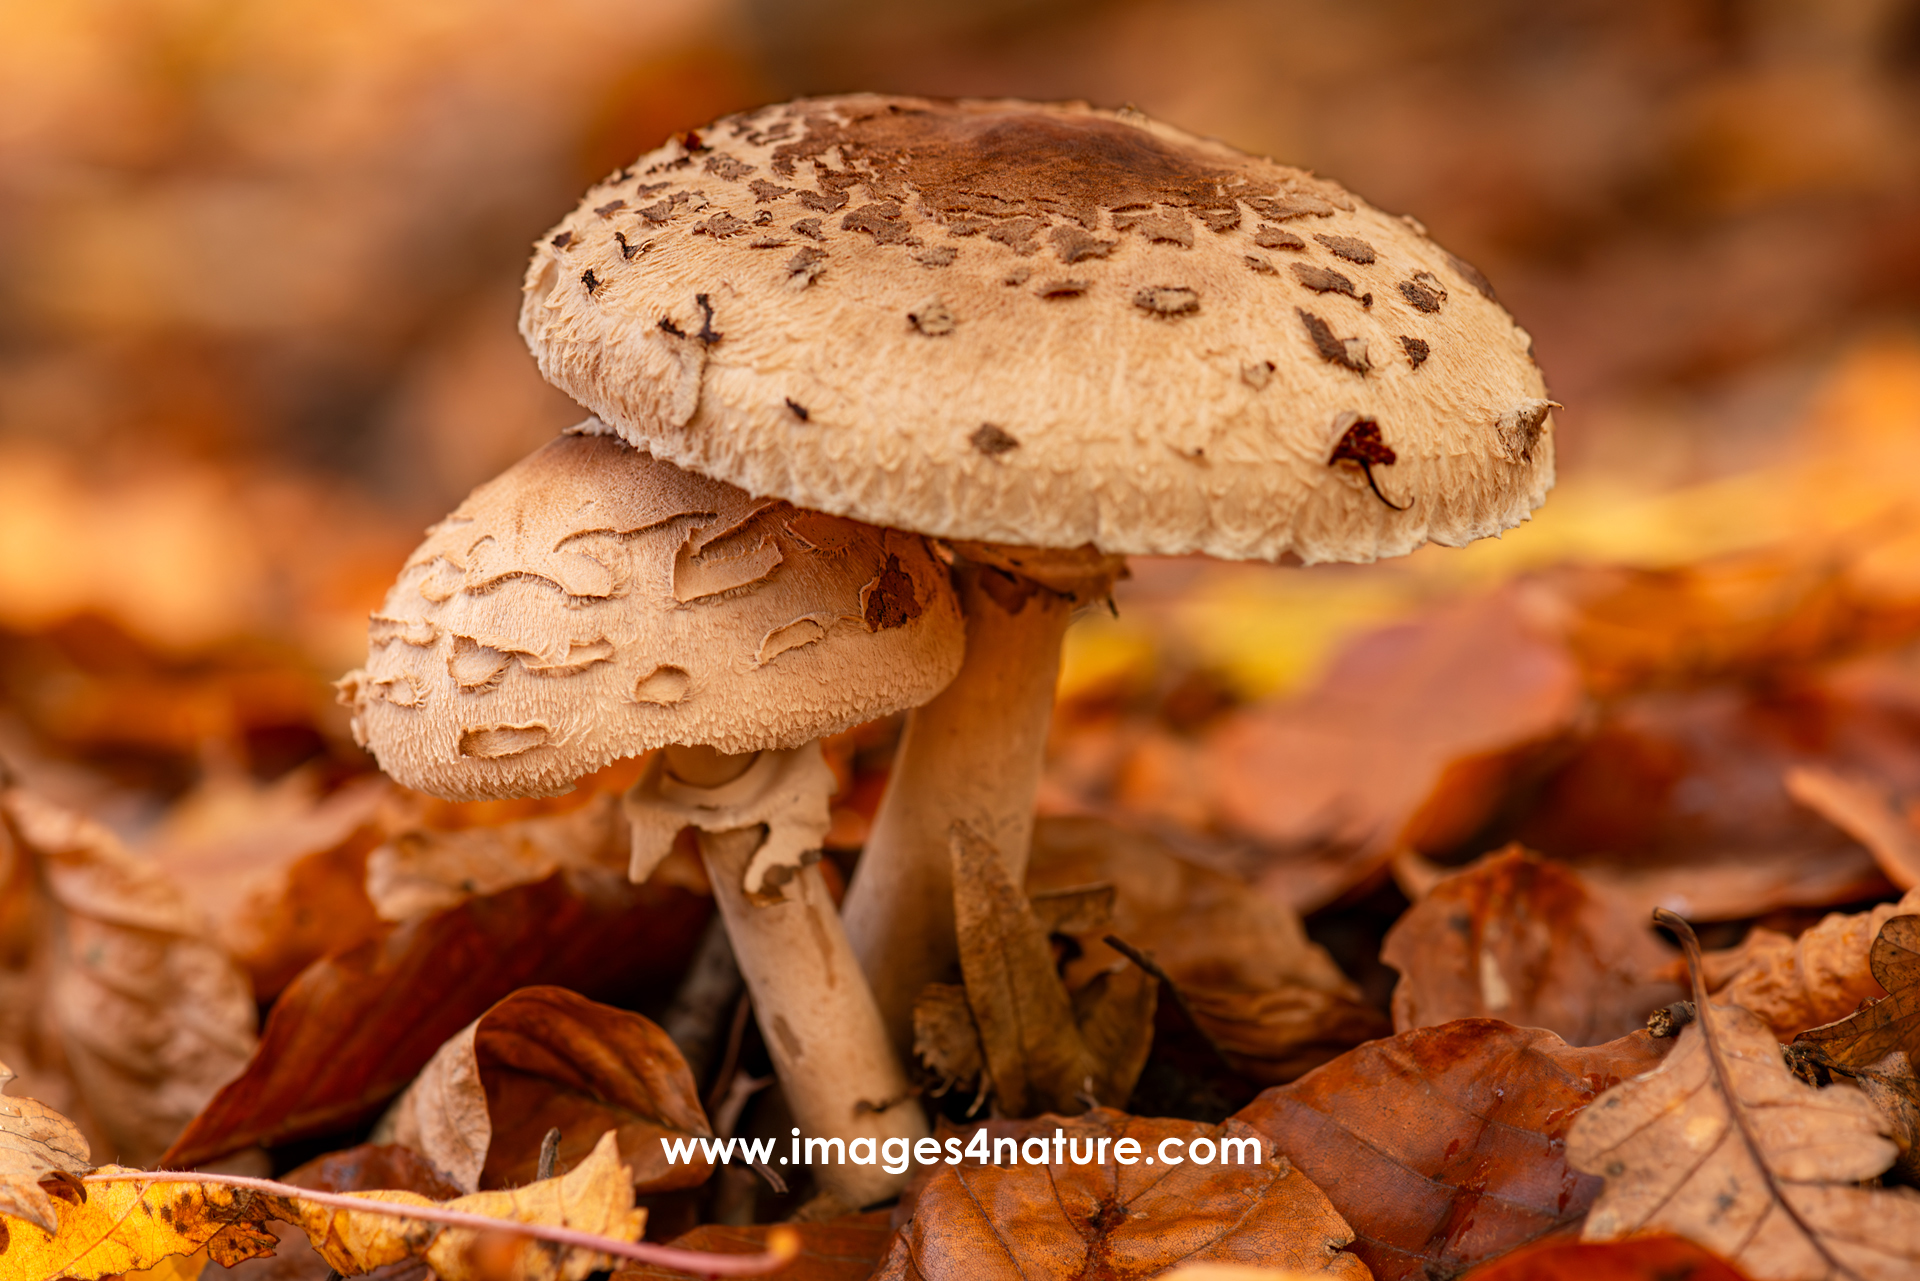 Two mushrooms standing next to each other, with the larger covering the smaller one